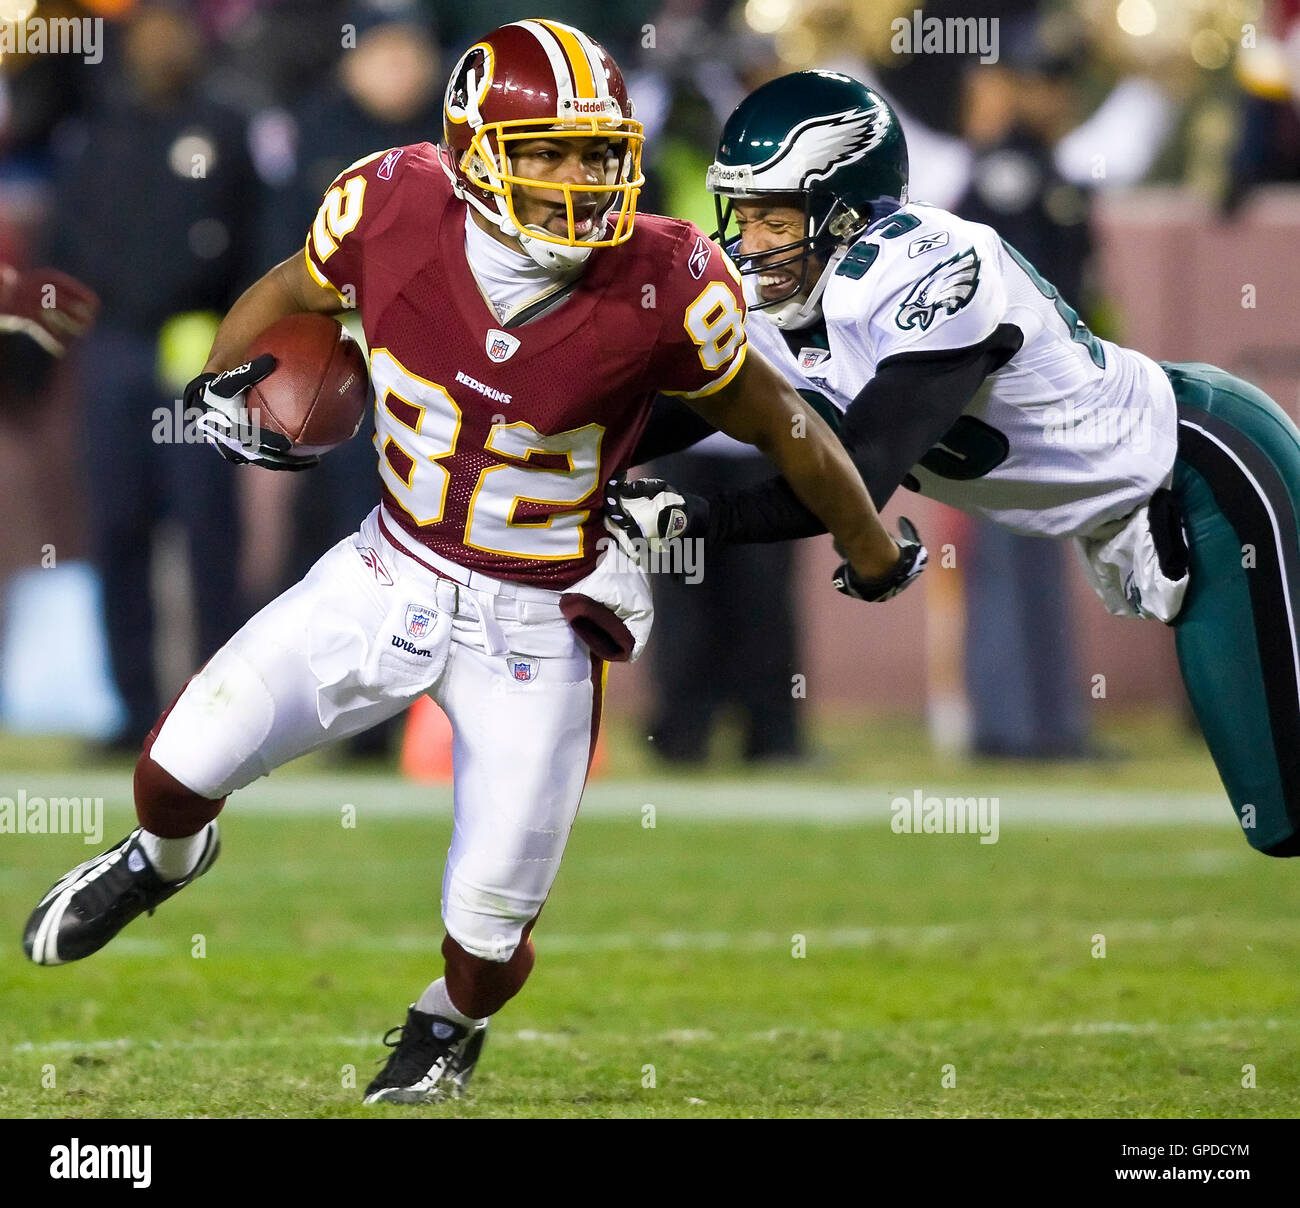 Washington Redskins wide receiver Antwaan Randle El (82) sheds a tackle attempt by Philadelphia Eagles wide receiver Greg Lewis (83) on a punt return.  The Washington Redskins defeated the Philadelphia Eagles 10-3 in an NFL football game held at Fedex Fie Stock Photo